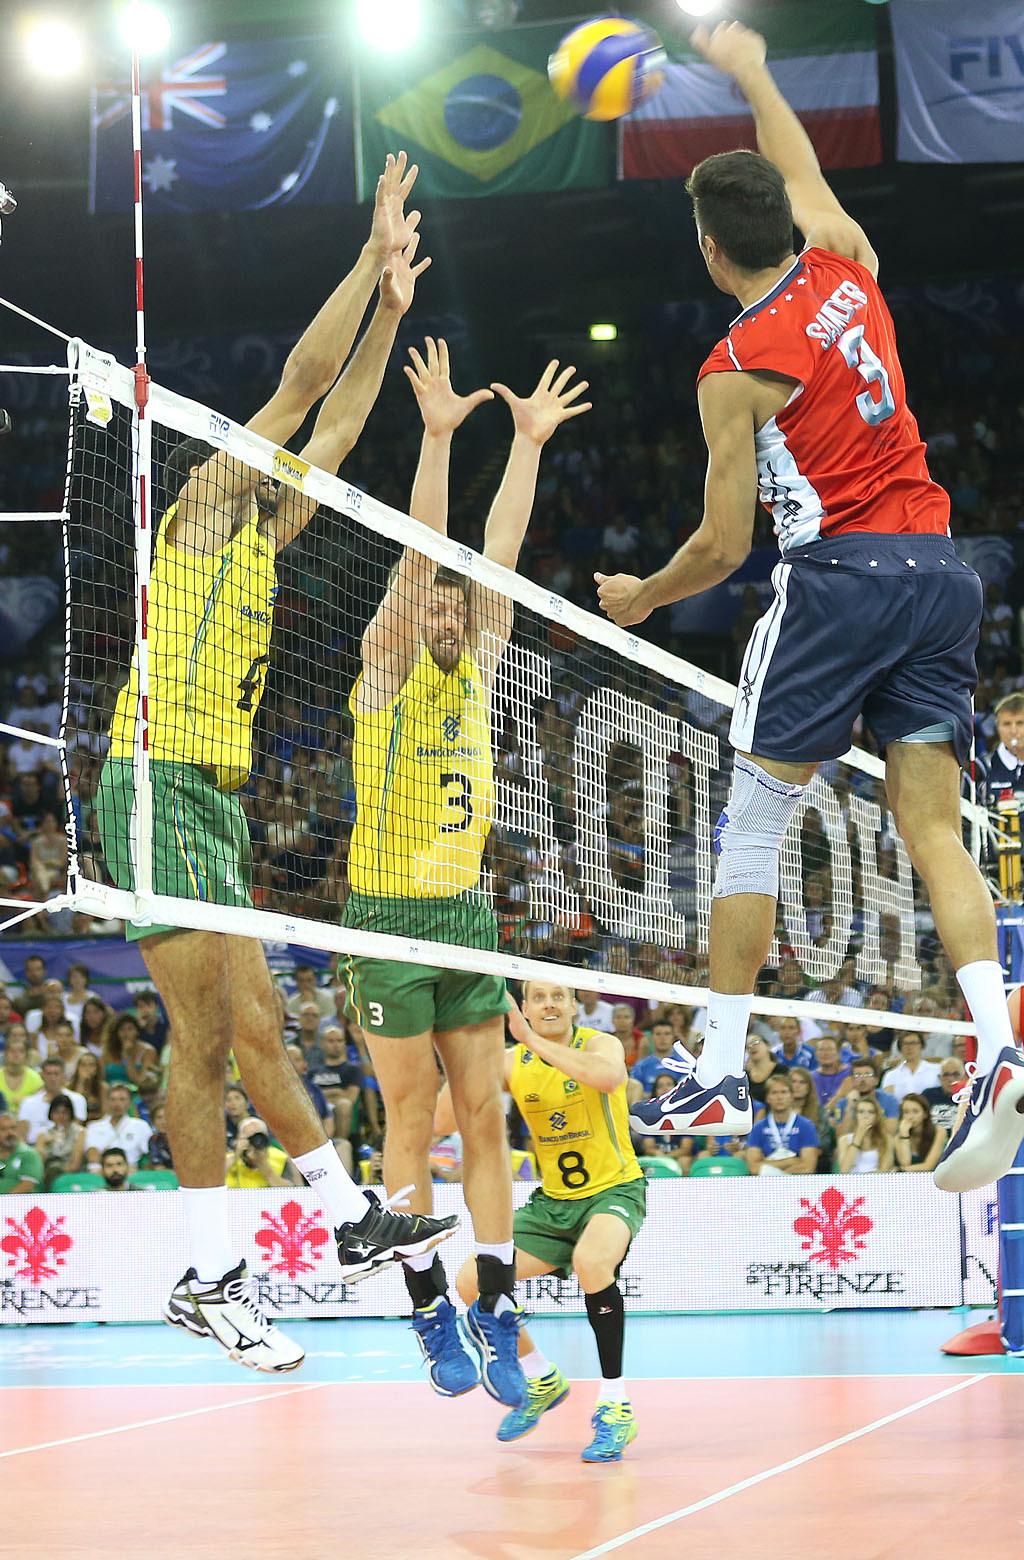 Taylor Sander (right) of USA spikes against De Souza and Carbonera (BRA)